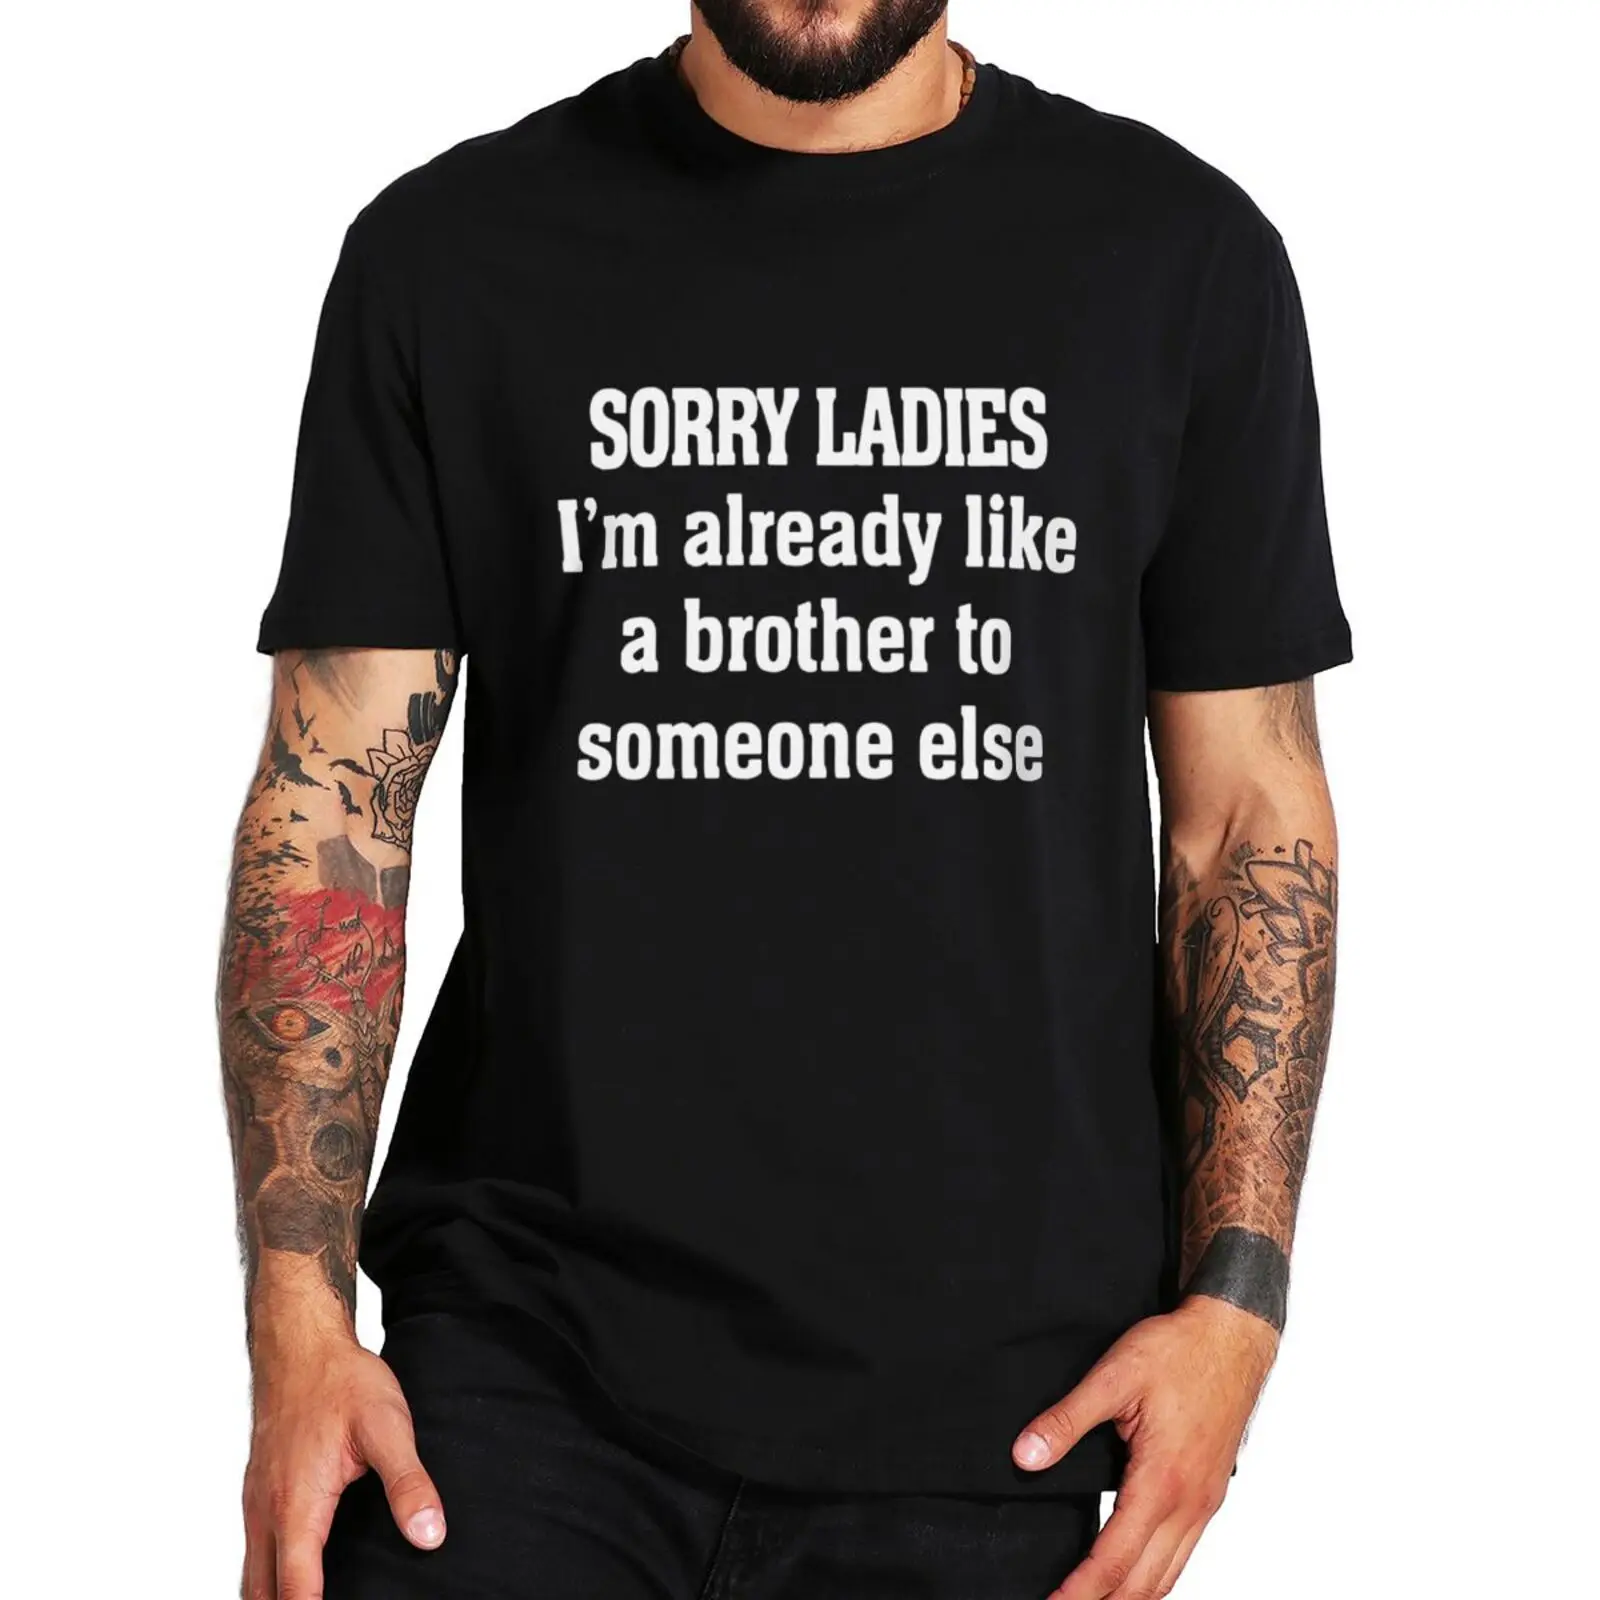 

Sorry Ladies Im Already Like A Brother To Someone Else T Shirt Funny Adult Humor Jokes Tops Casual 100% Cotton T-shirts EU Size